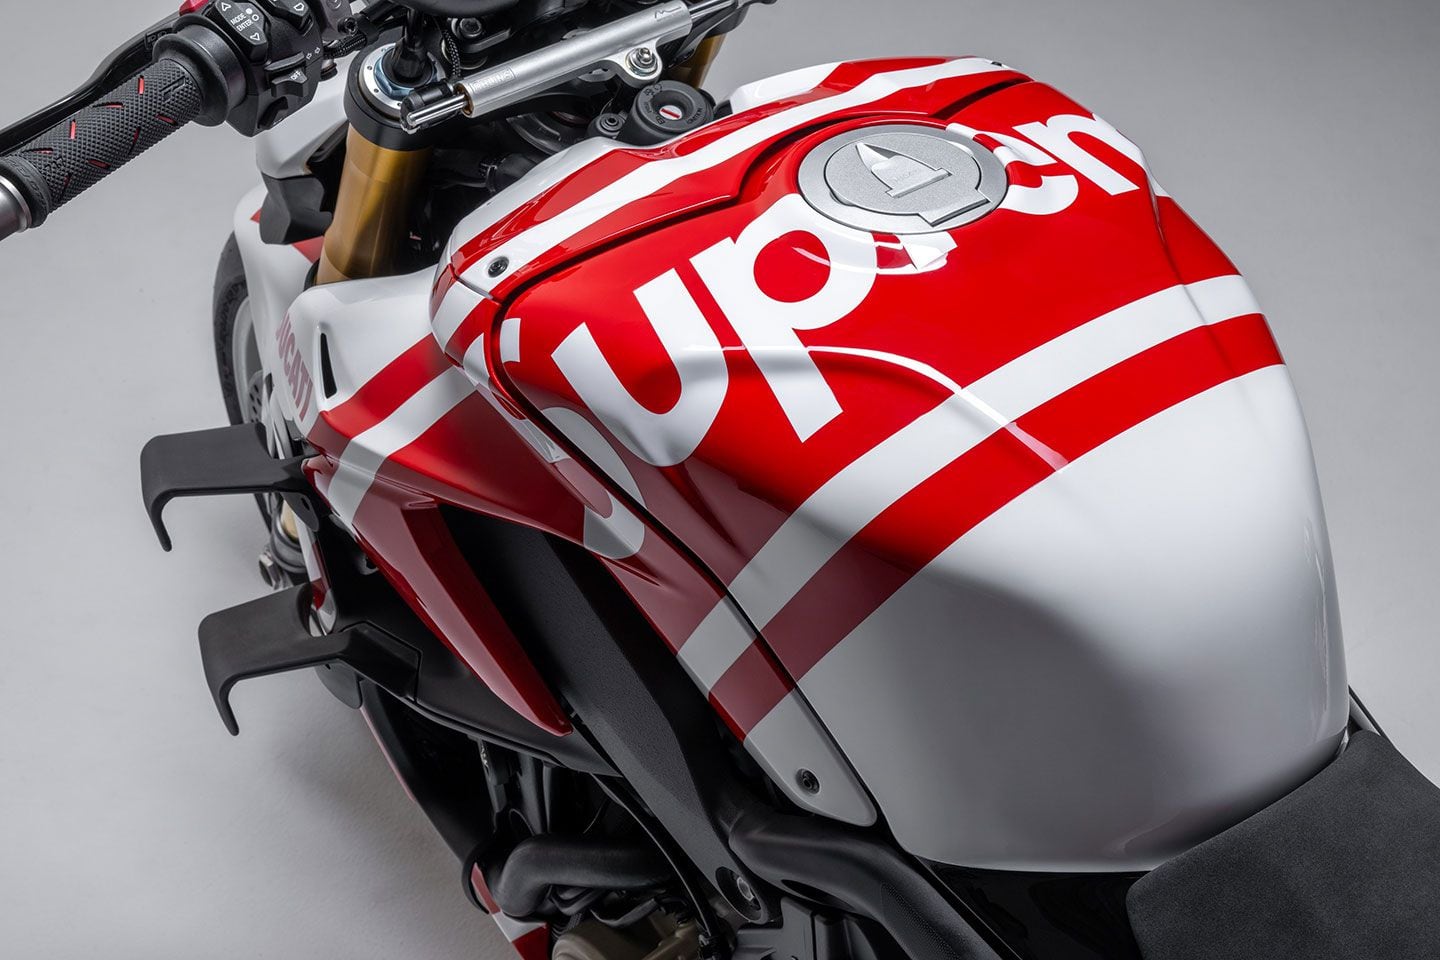 The bold white typeface of the Supreme logo across the Streetfighter’s tank sure looks familiar. Any art majors out there?